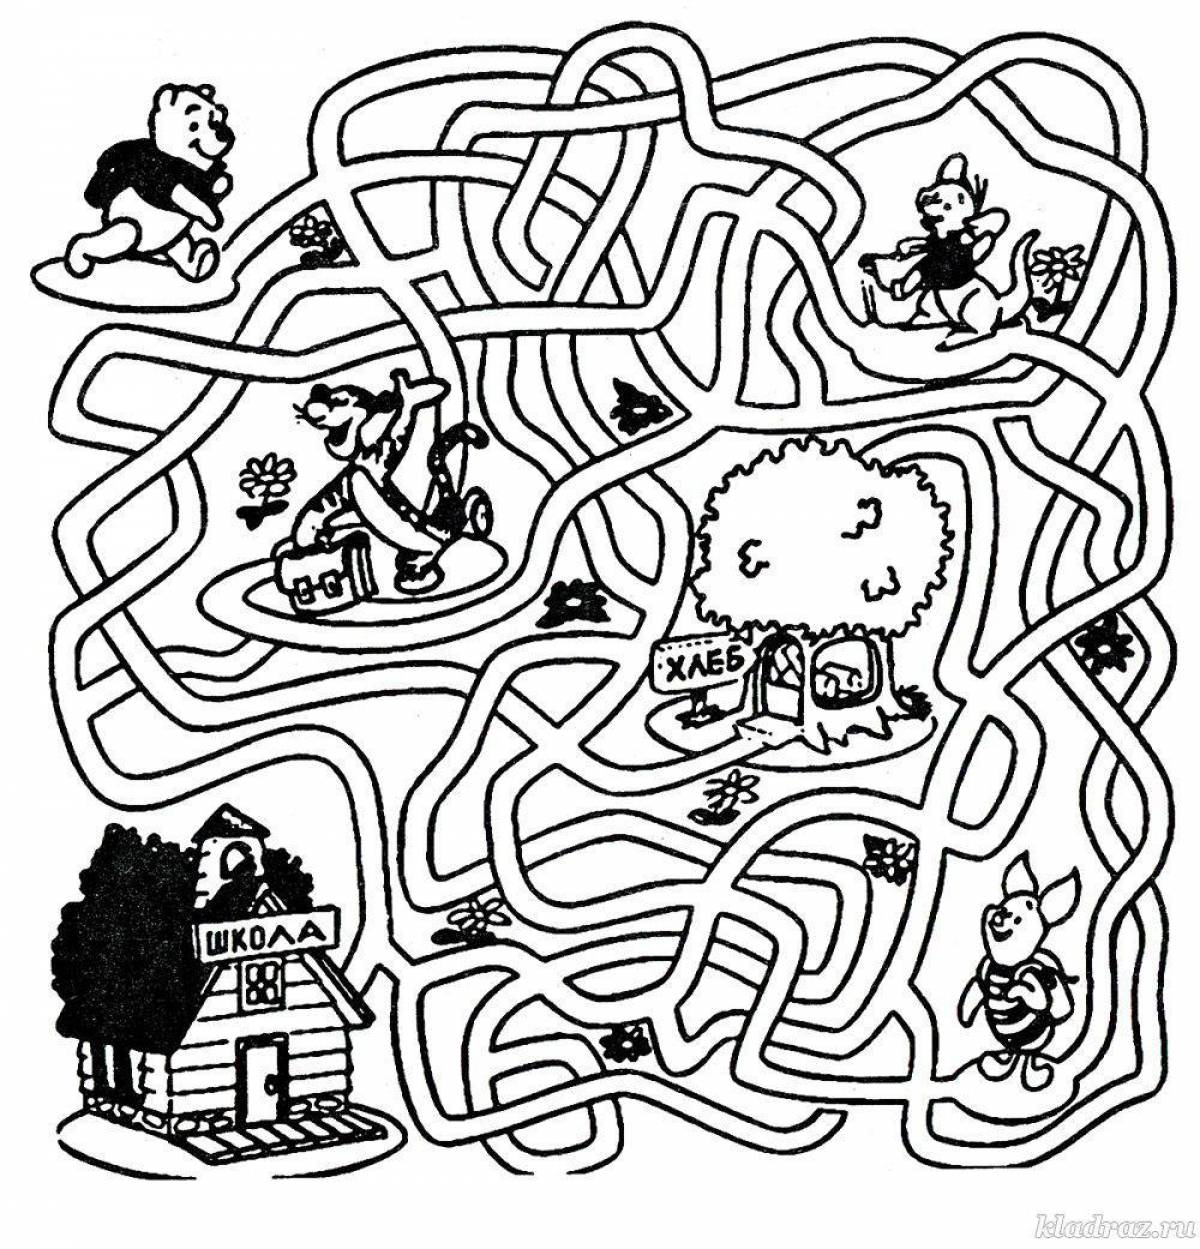 Animated maze coloring book